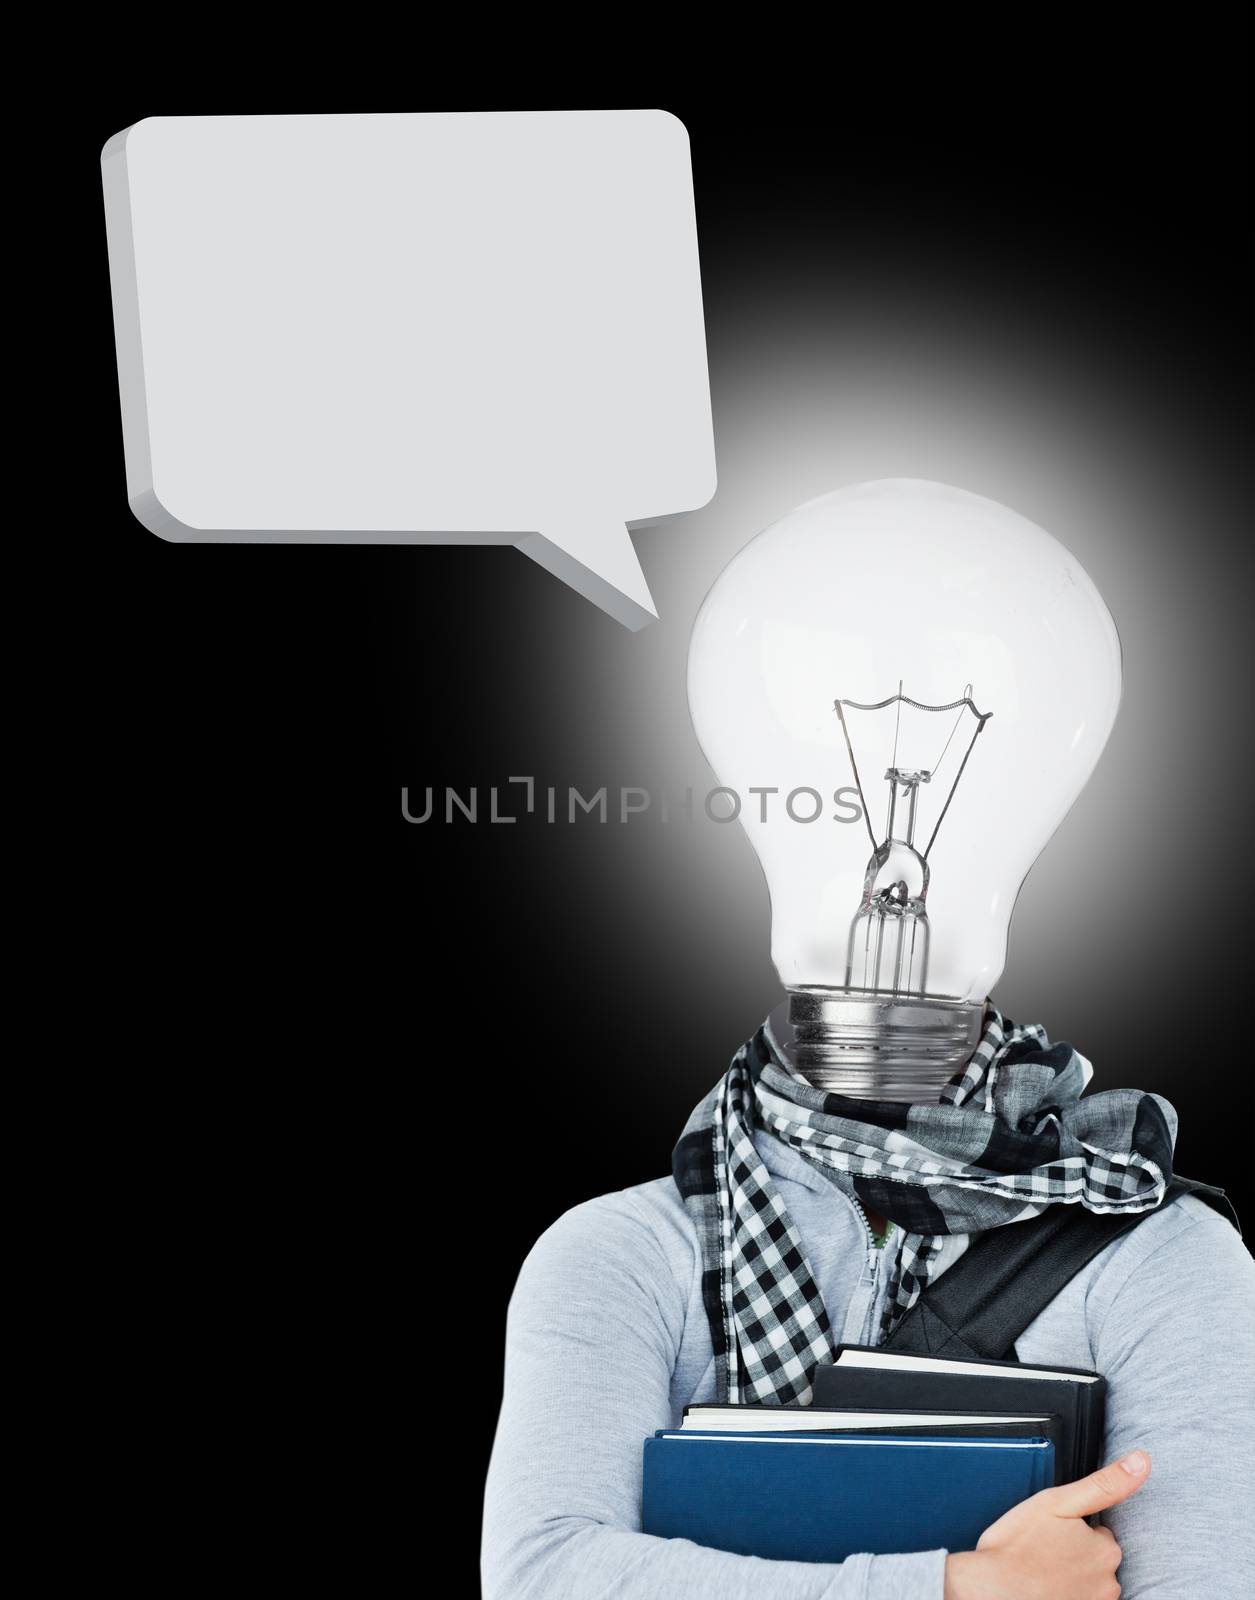 Student with a light bulb head and speech bubble on black background